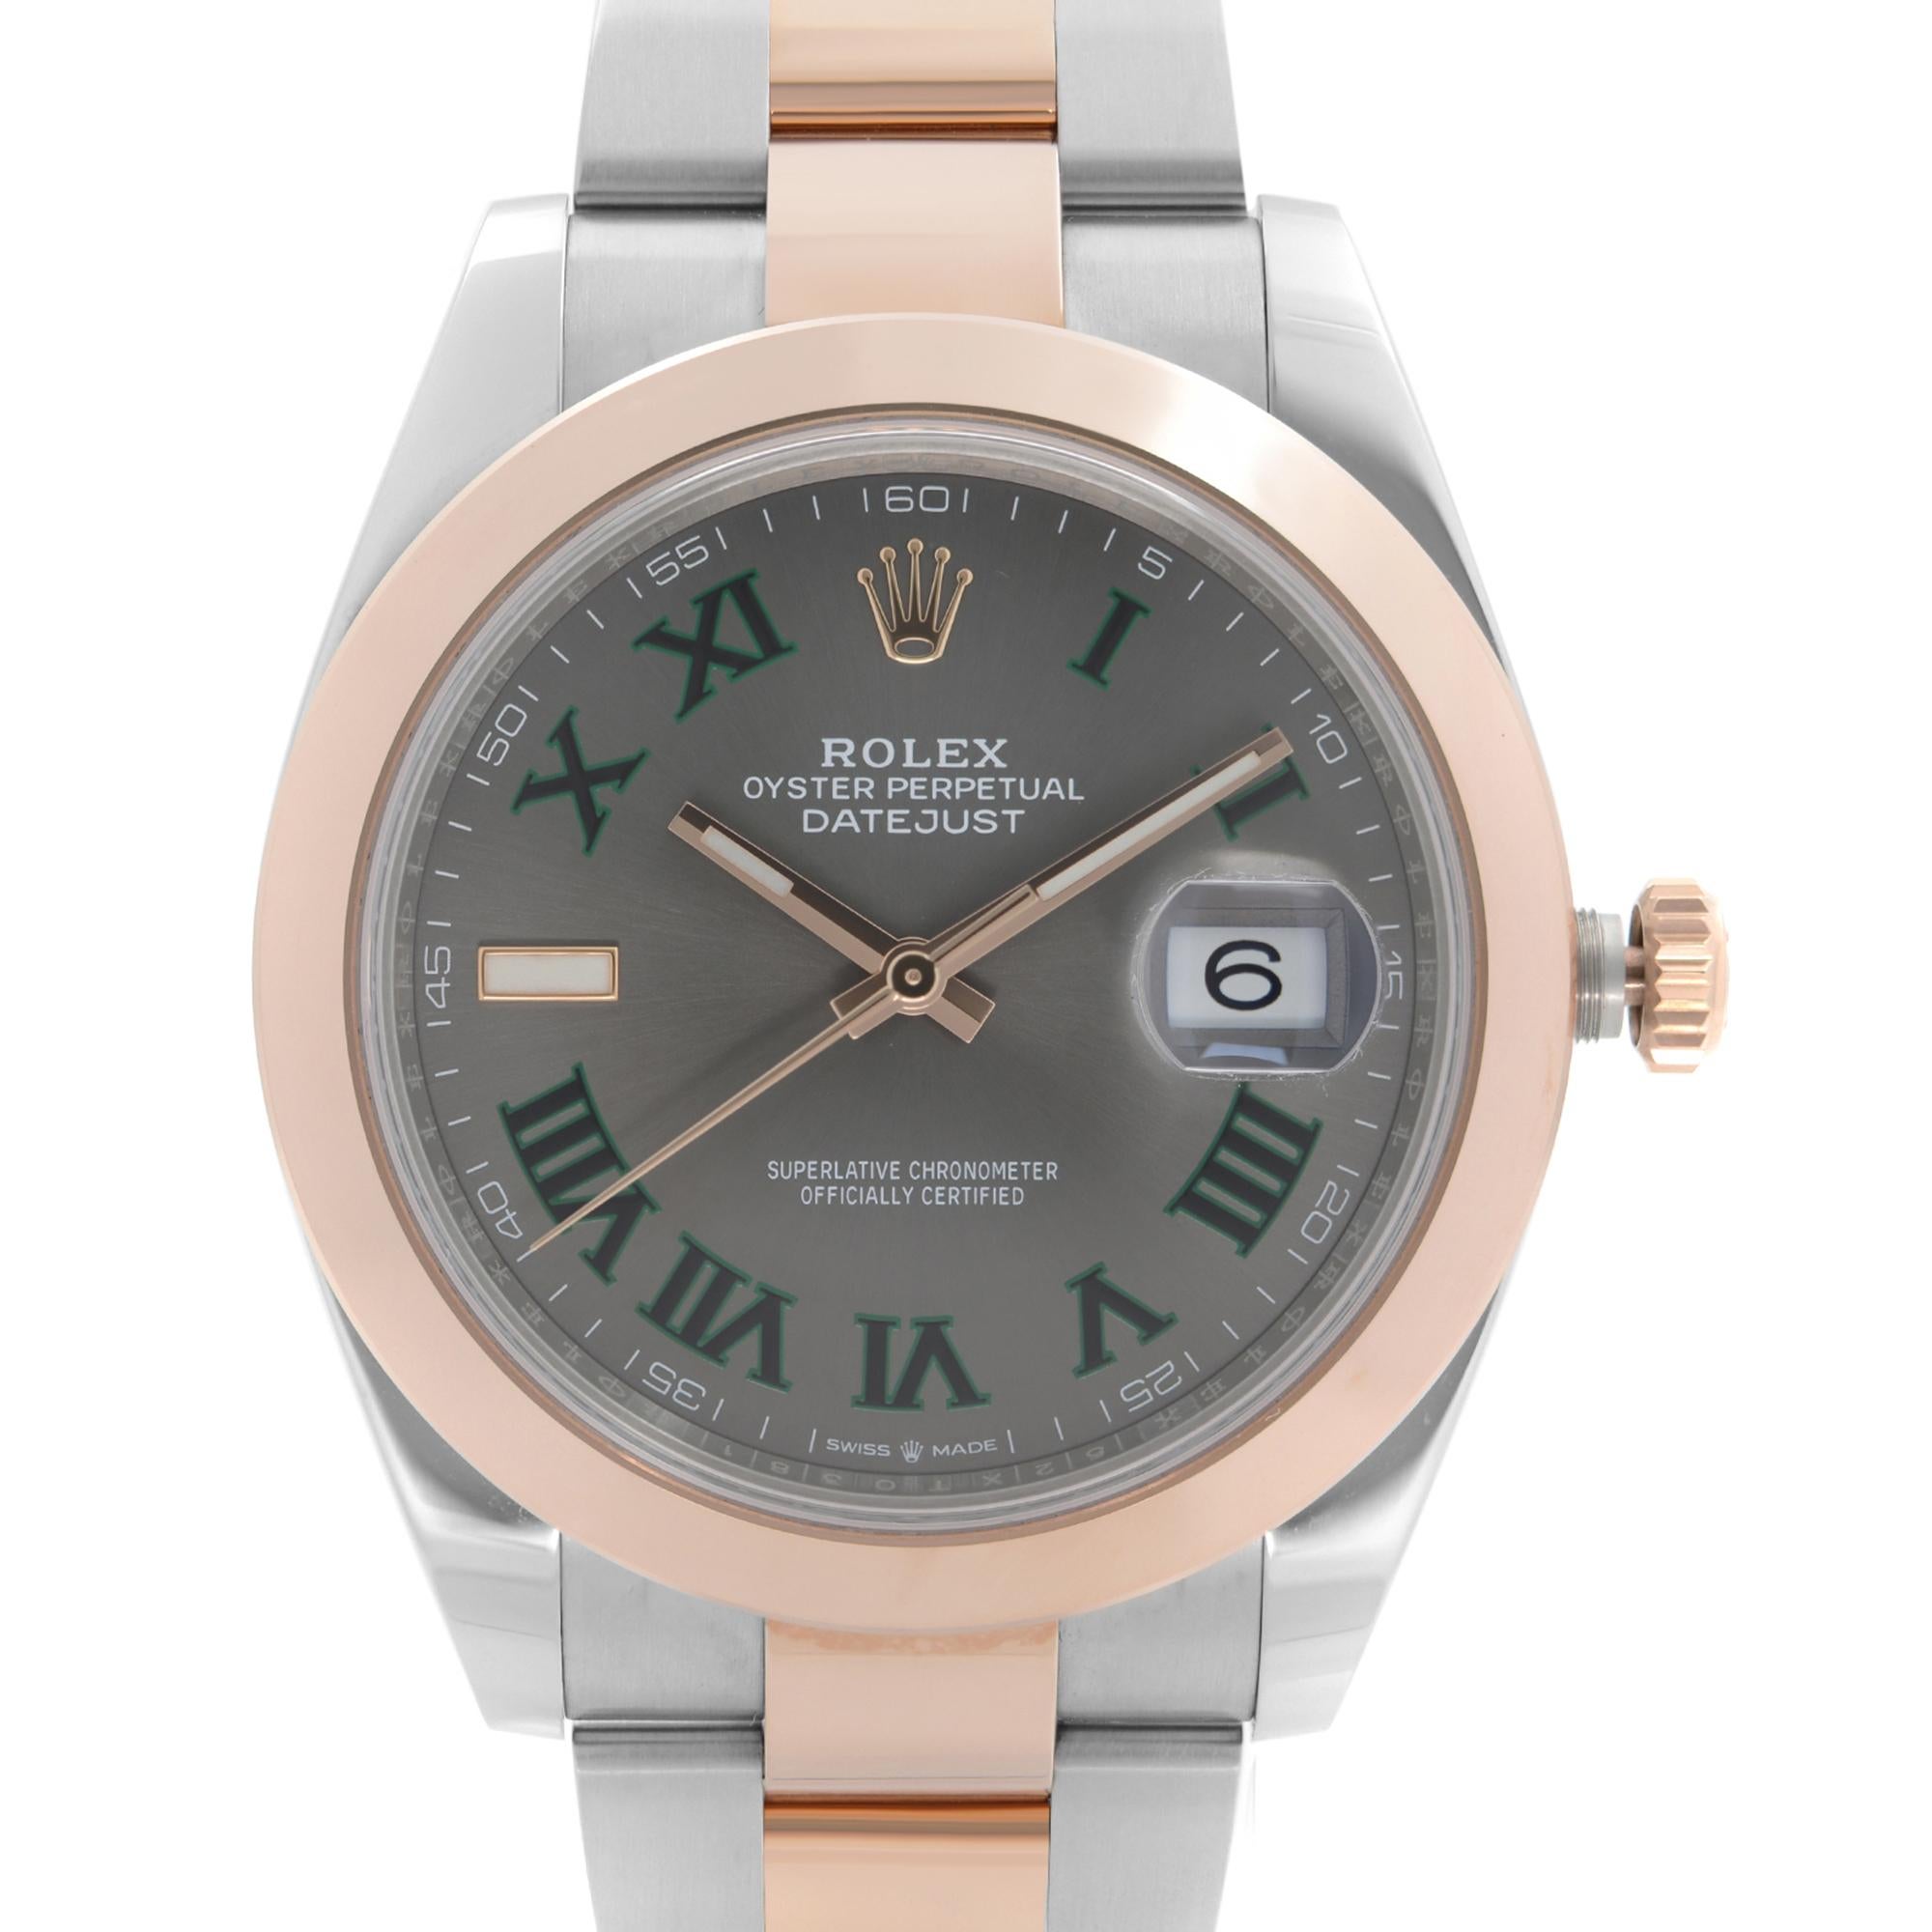 Unworn. Comes with the original box and papers.

Brand Information:

Brand: Rolex
Country/Region of Manufacture: Switzerland
Watch Type:

Type: Wristwatch
Department: Men
Style: Dress/Formal, Luxury
Model Information:

Model Number: 126301
Model: